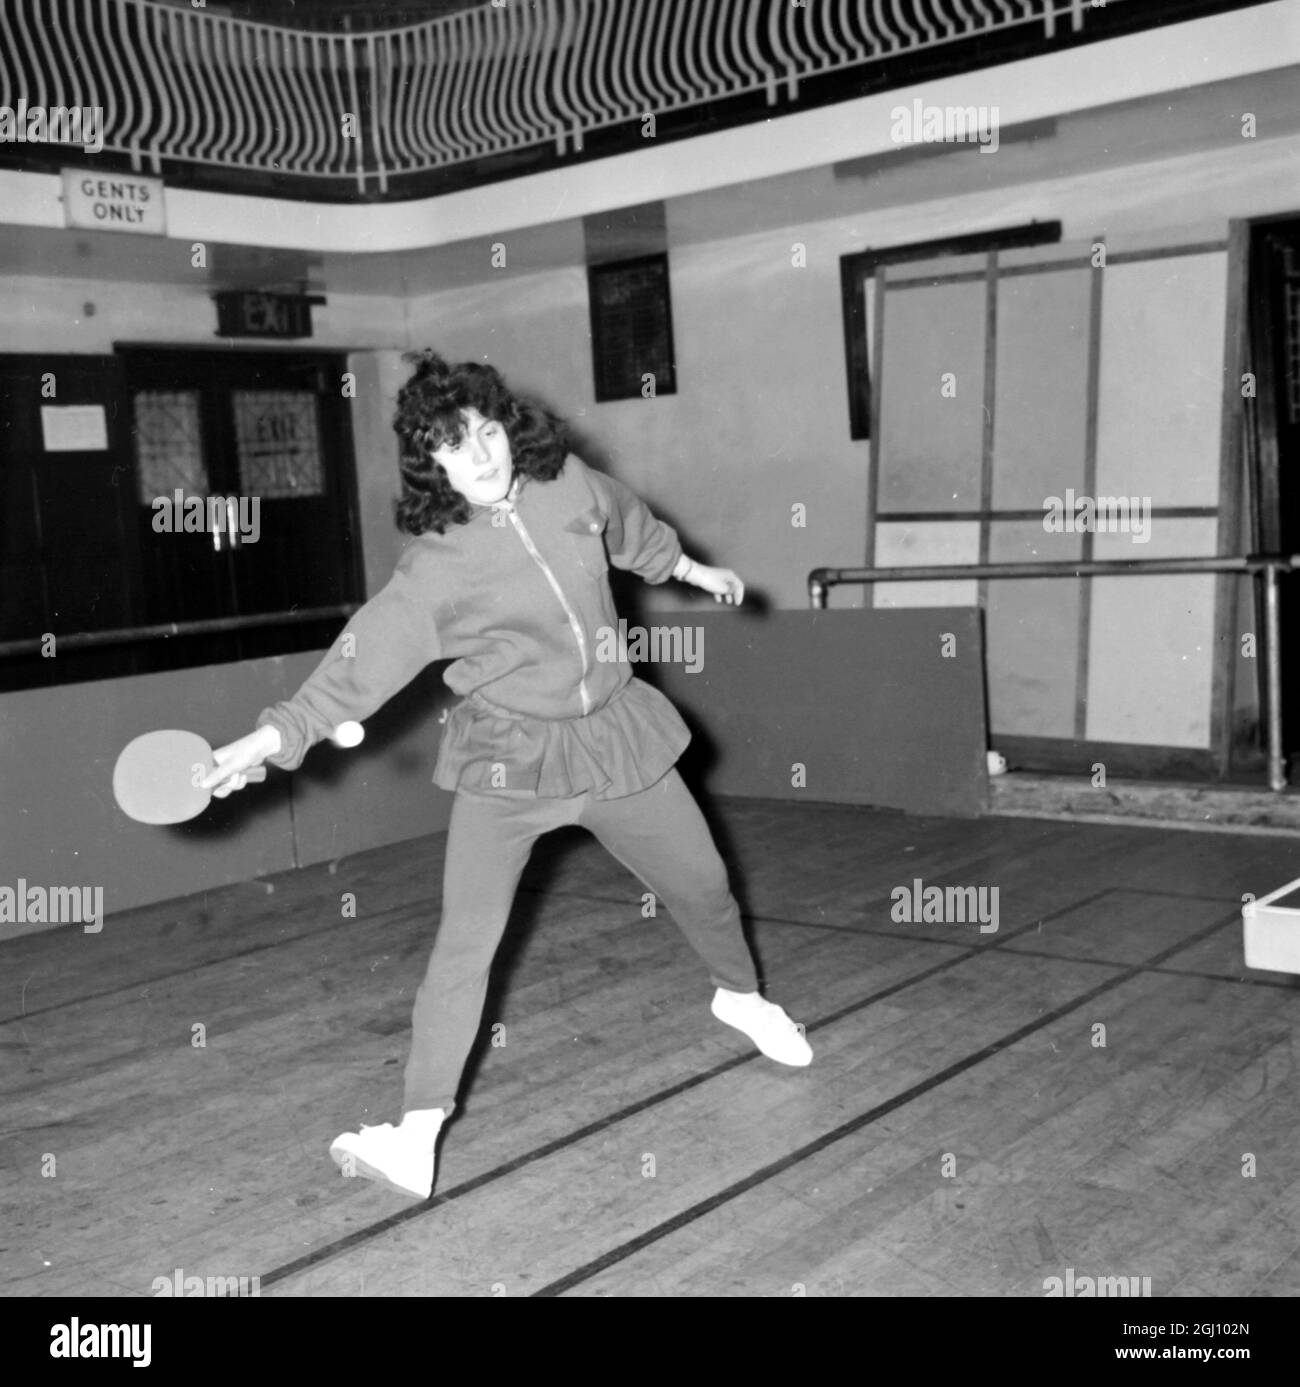 JEAN HARROWER AT TABLE TENNIS CHAMPIONSHIPS IN GREENWICH - 2 JANUARY 1961 Stock Photo